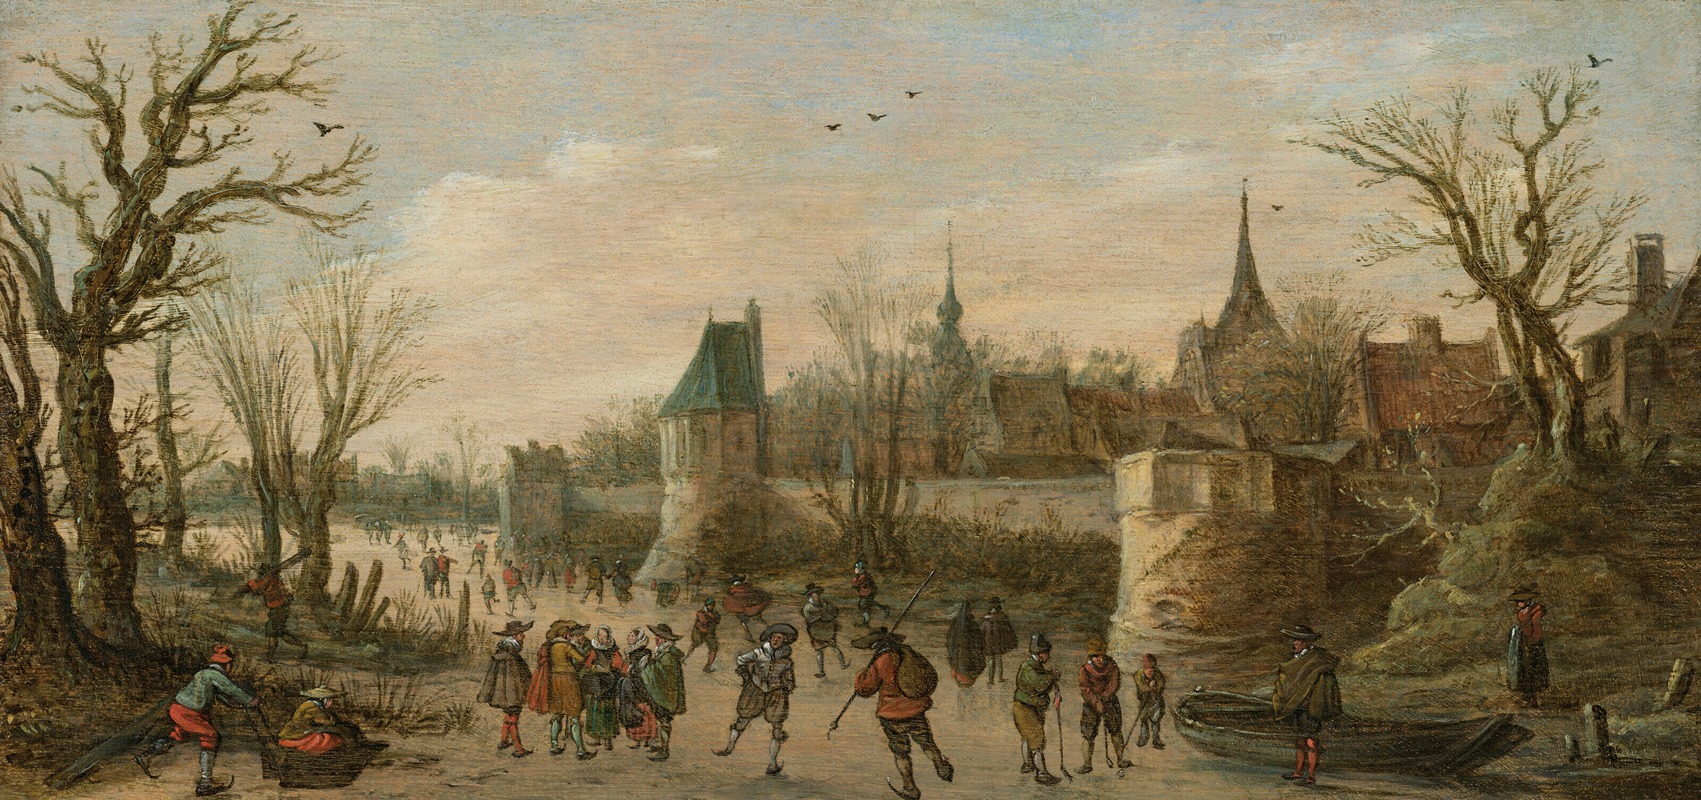 Jan van Goyen - A winter landscape with townspeople ice skating before a fortified town